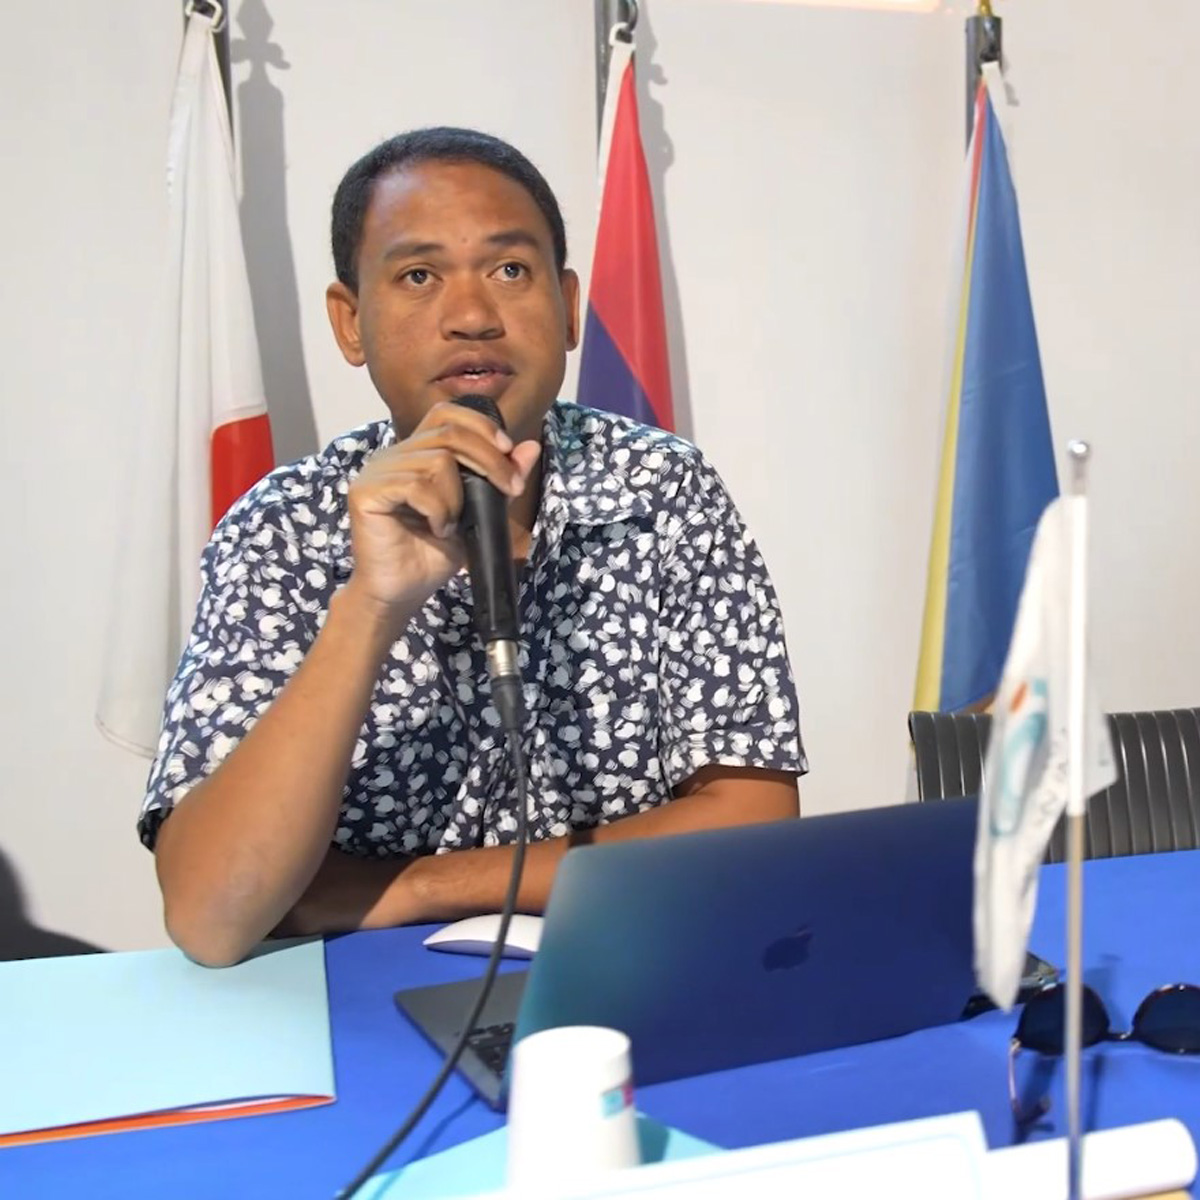 Consolidating small-scale fishing in the Indian Ocean: Review of the Annual General Meeting of the Federation of Artisanal Fishermen of the Indian Ocean (FPAOI)